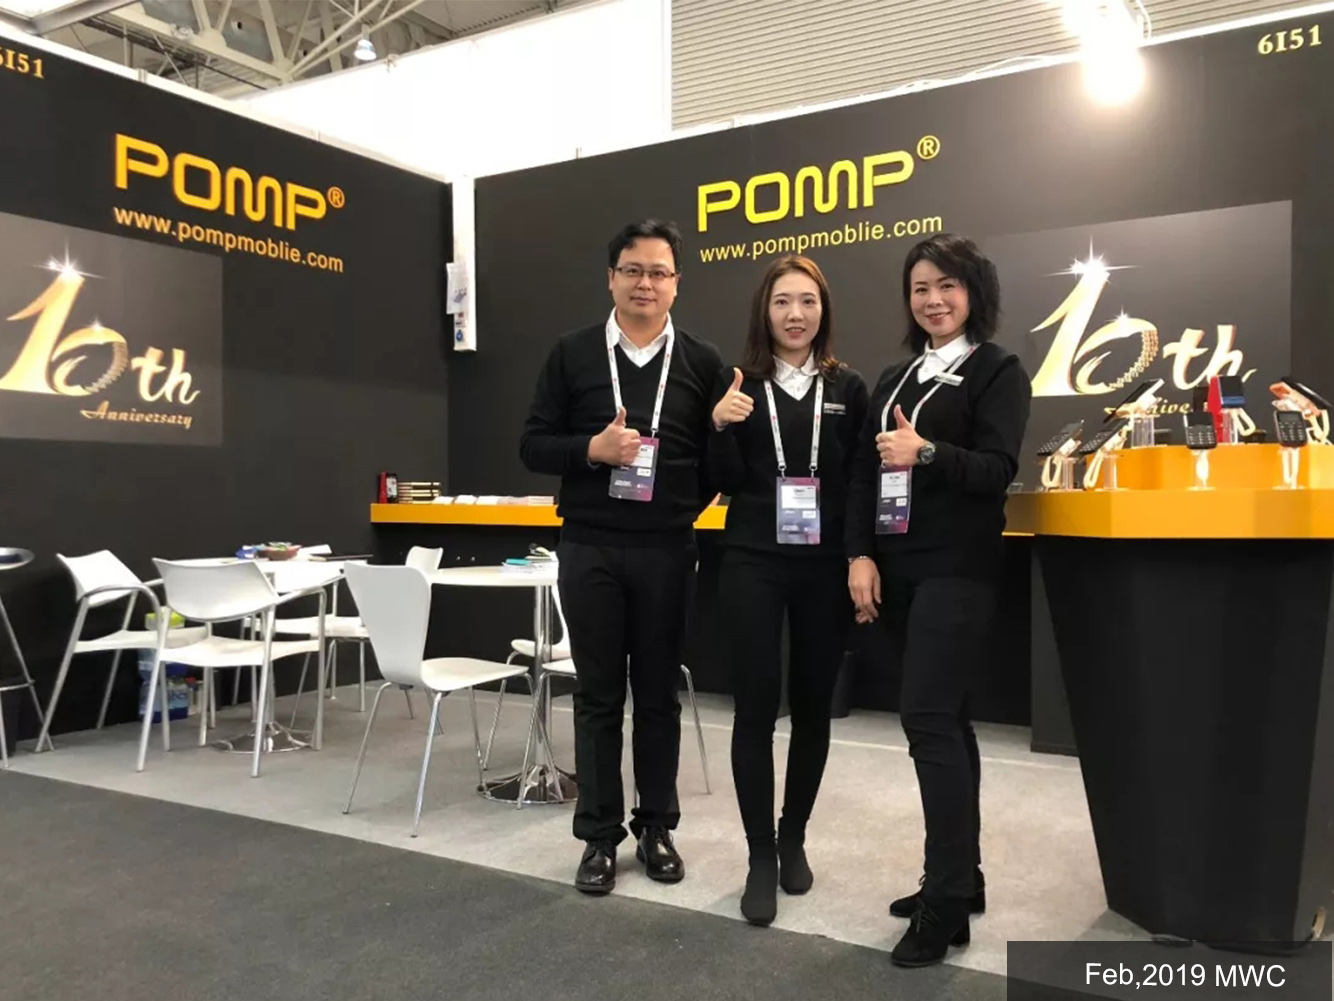 POMP has participated in exhibitions